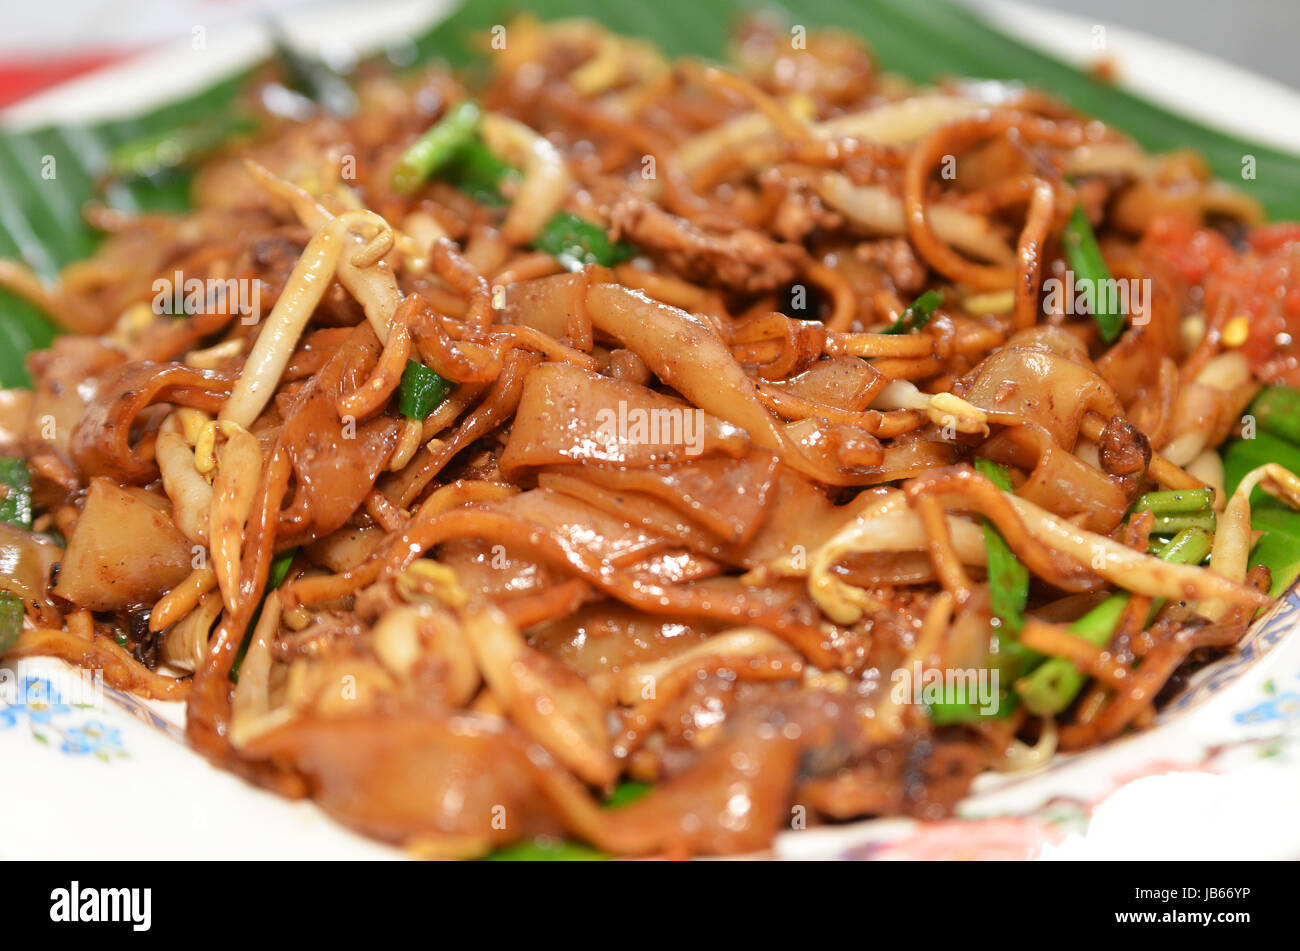 Fried Penang Char Kuey Teow which is a popular noodle dish in Stock